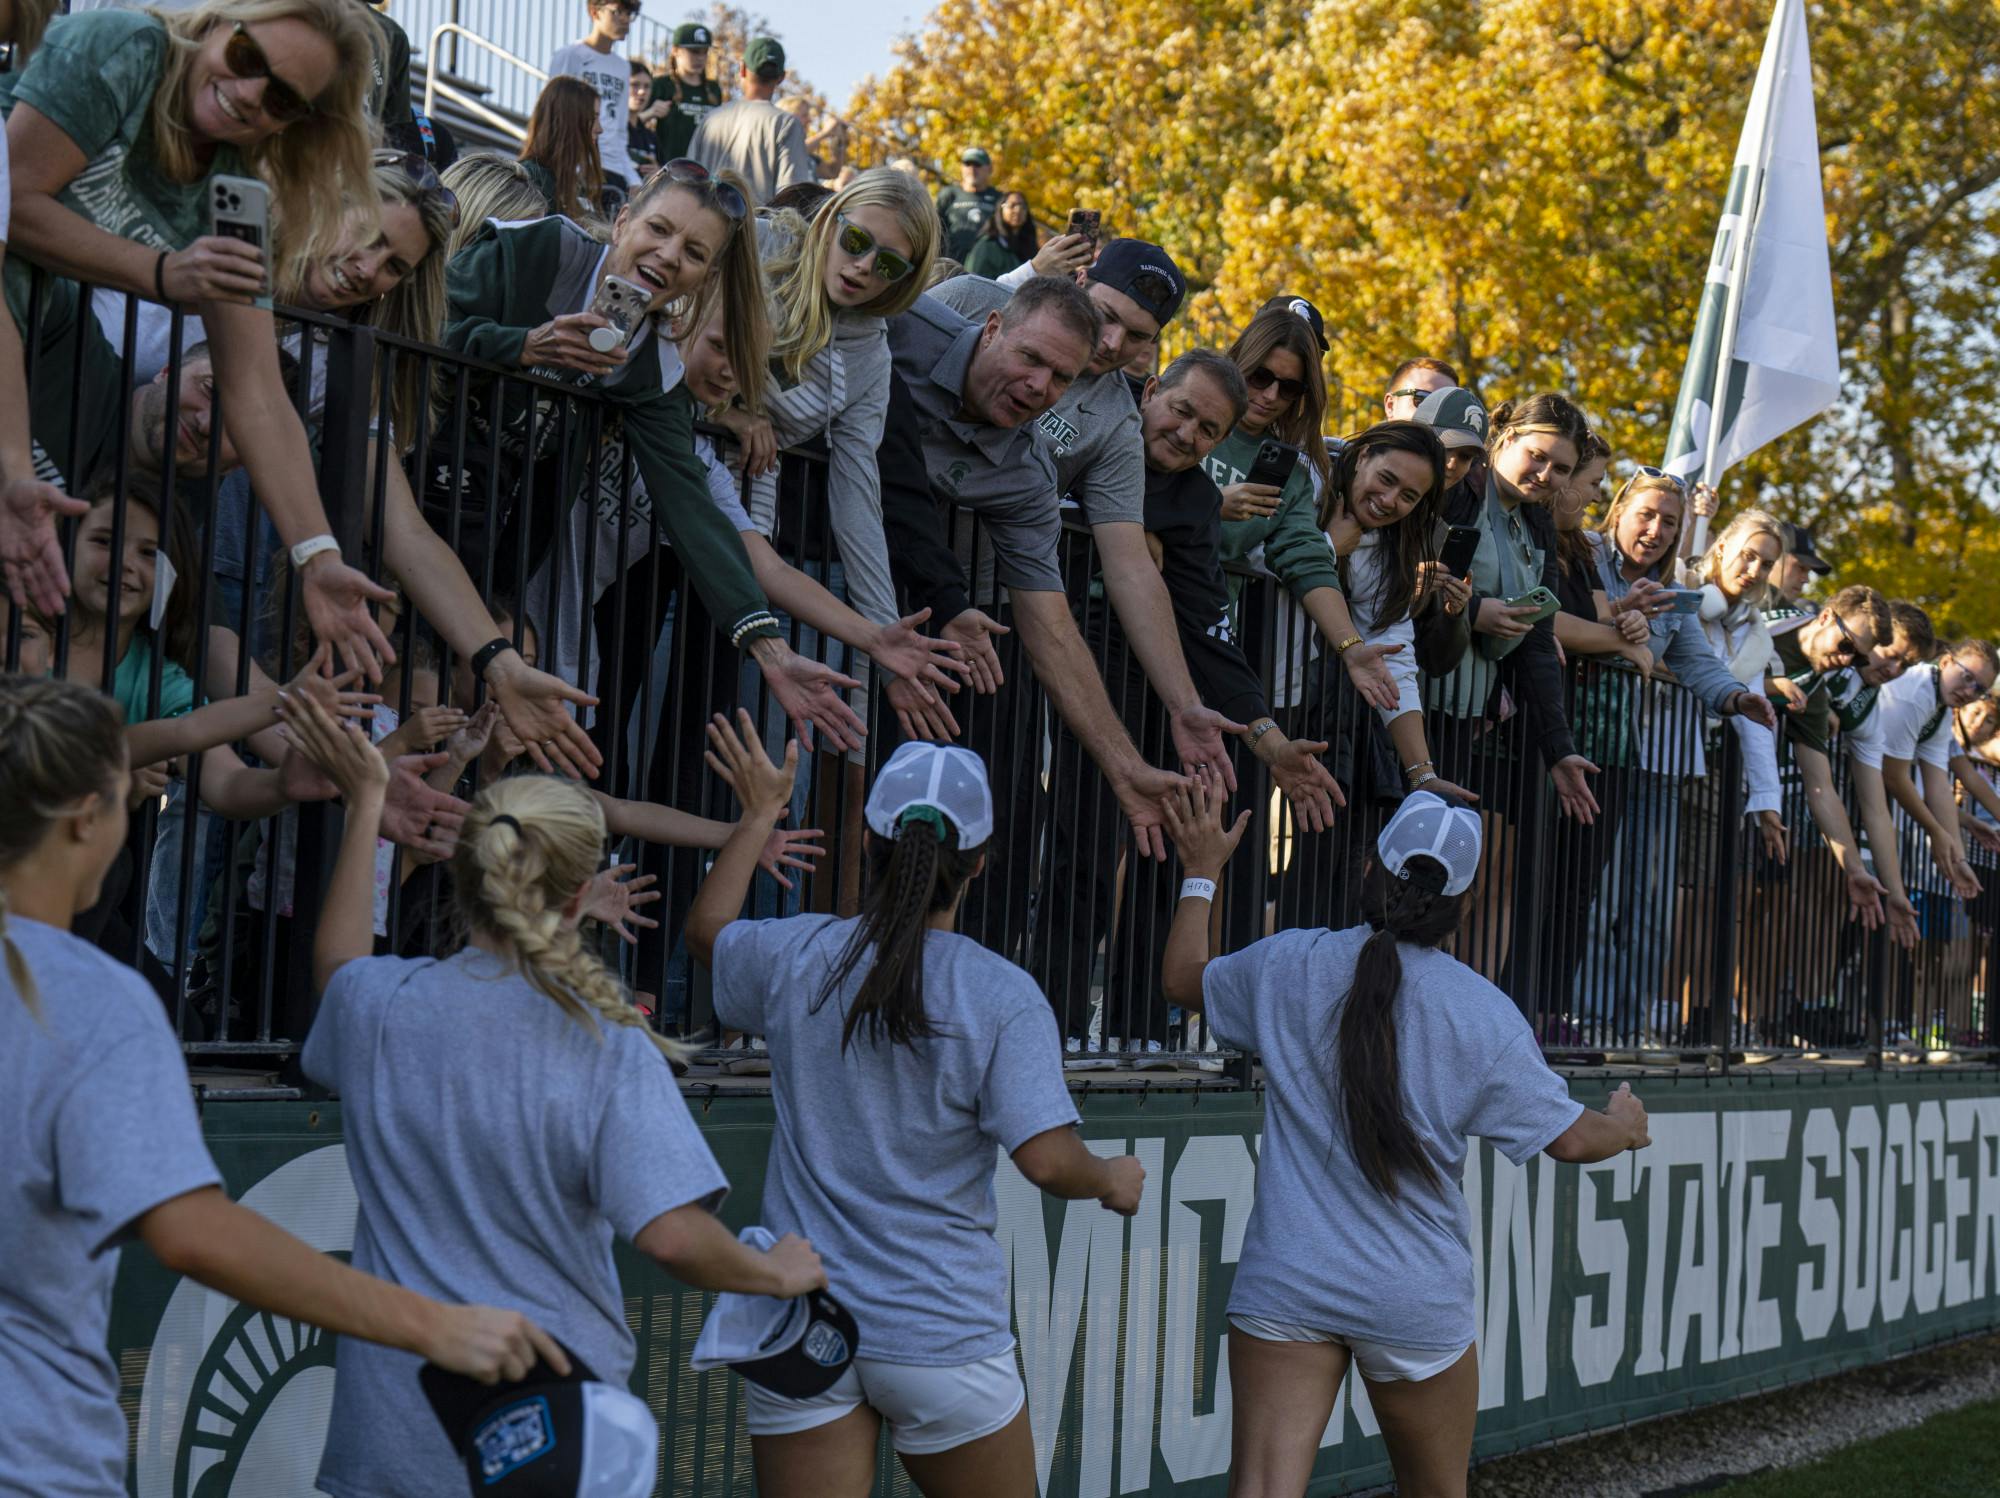 Fans reach for high-fives from the team after Michigan State’s win over the Rutgers, 1-0, on Sunday, Oct. 23, 2022 at DeMartin Stadium. The Spartans also celebrated their B1G Championship.